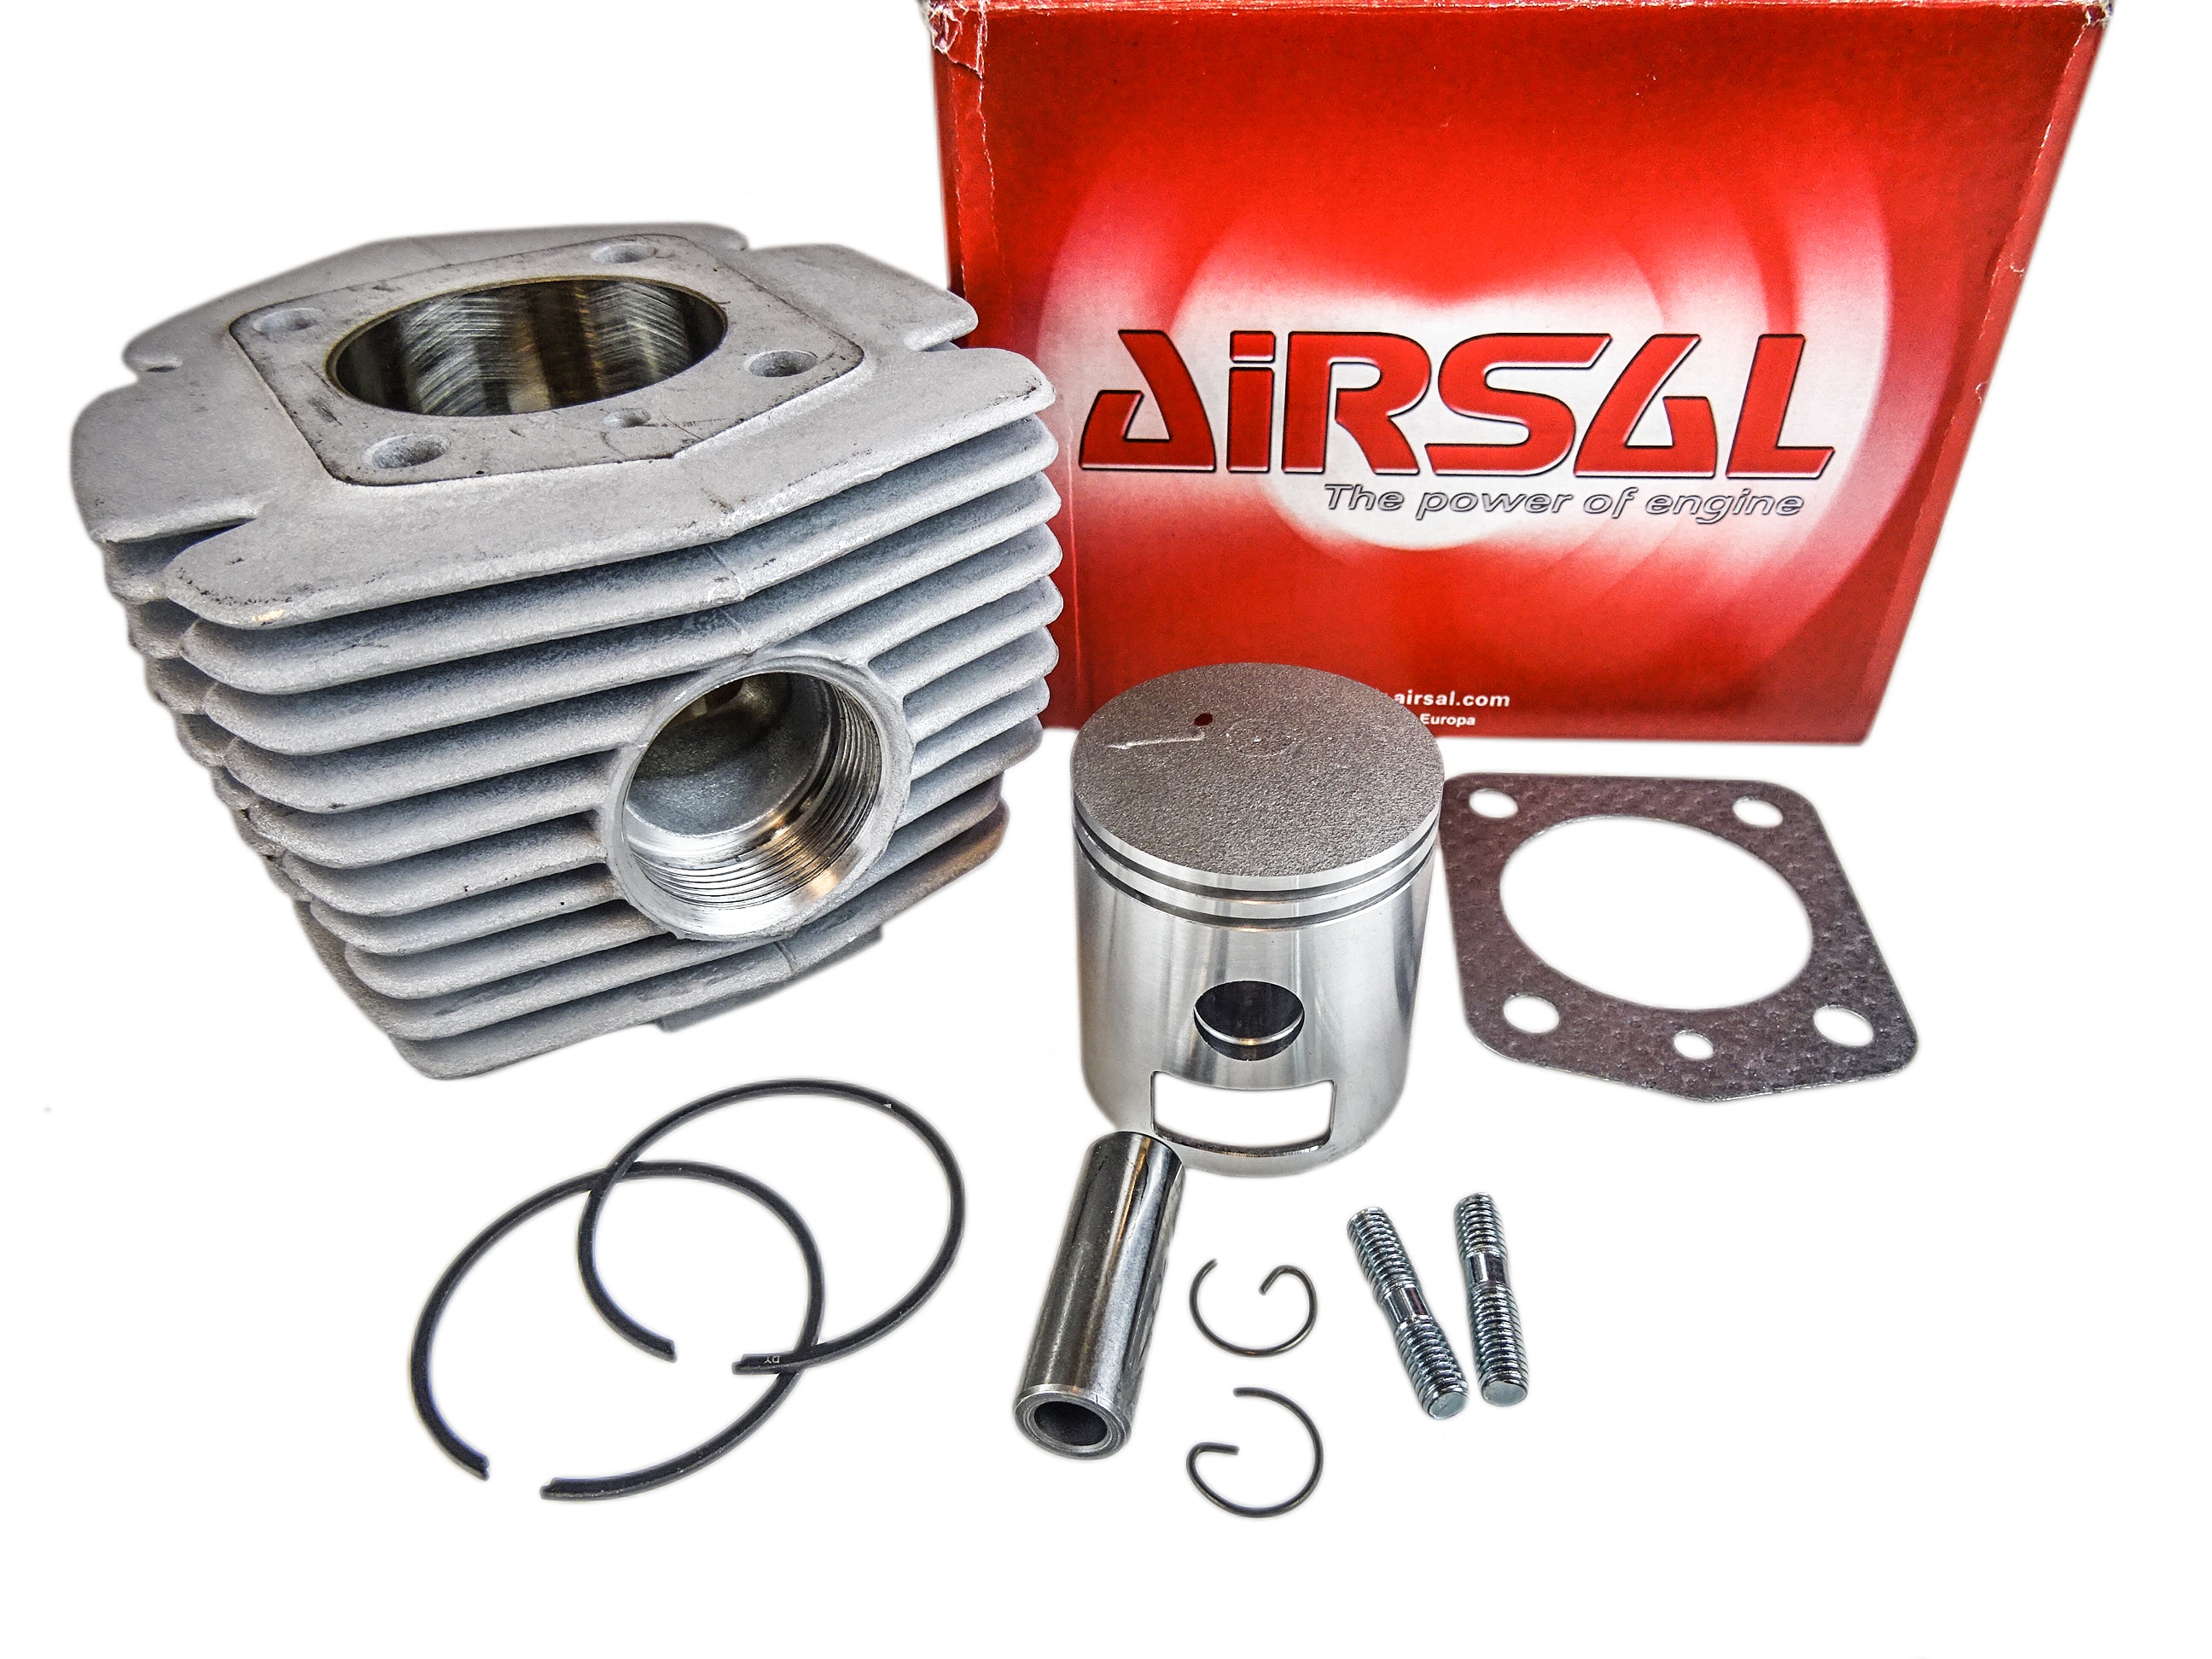 Cylinderkit Airsal 70cc 45mm MBK 88